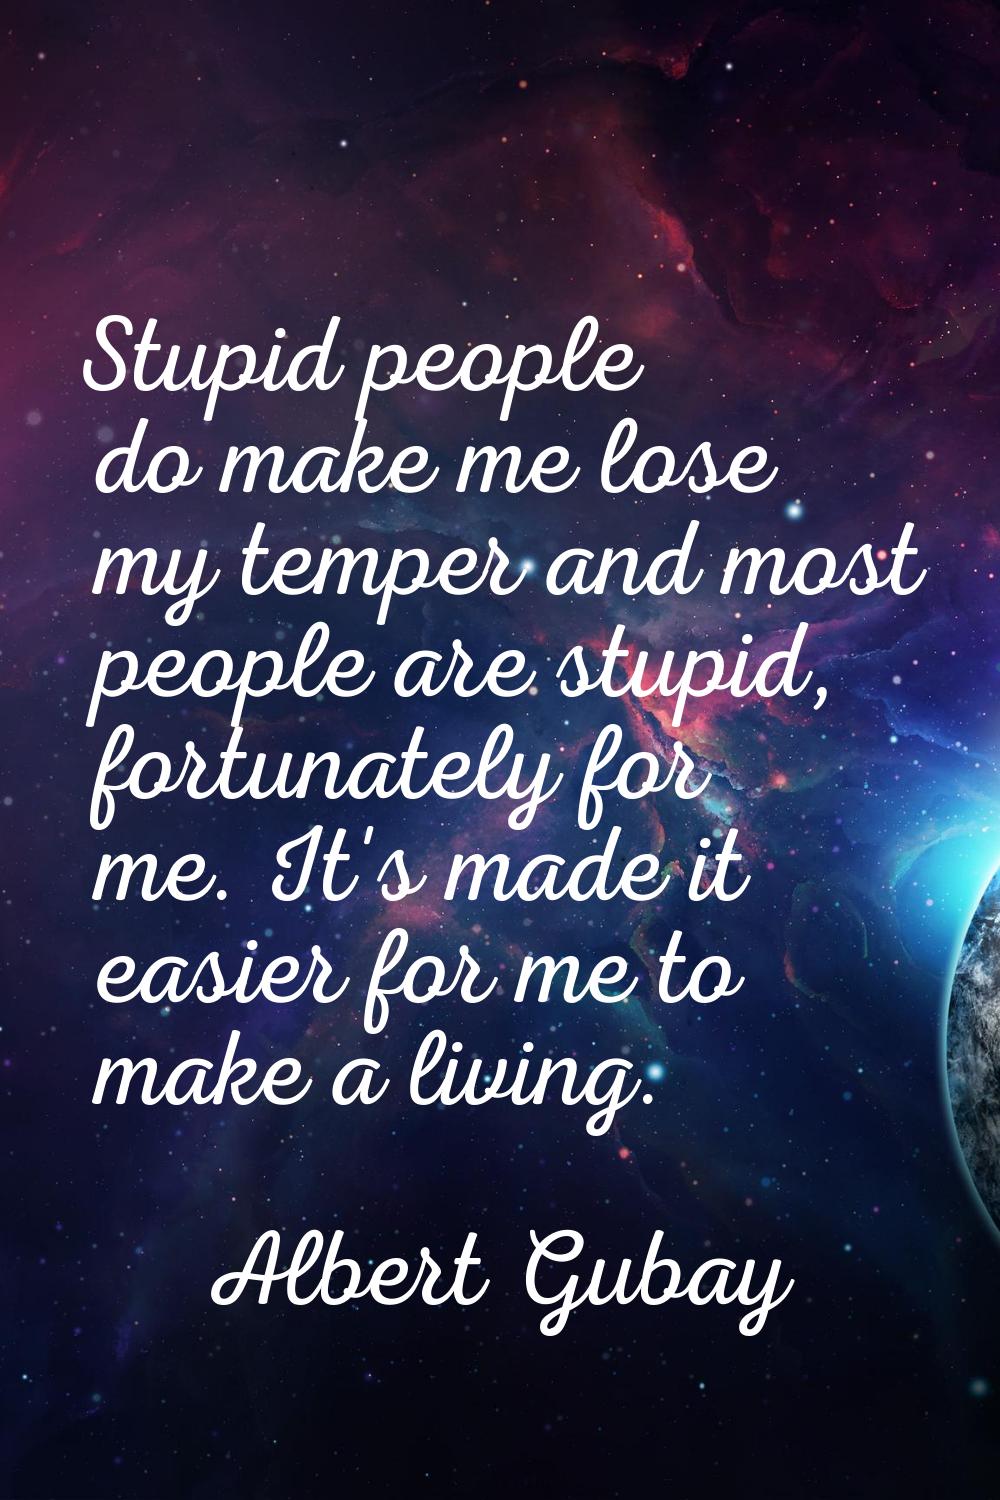 Stupid people do make me lose my temper and most people are stupid, fortunately for me. It's made i